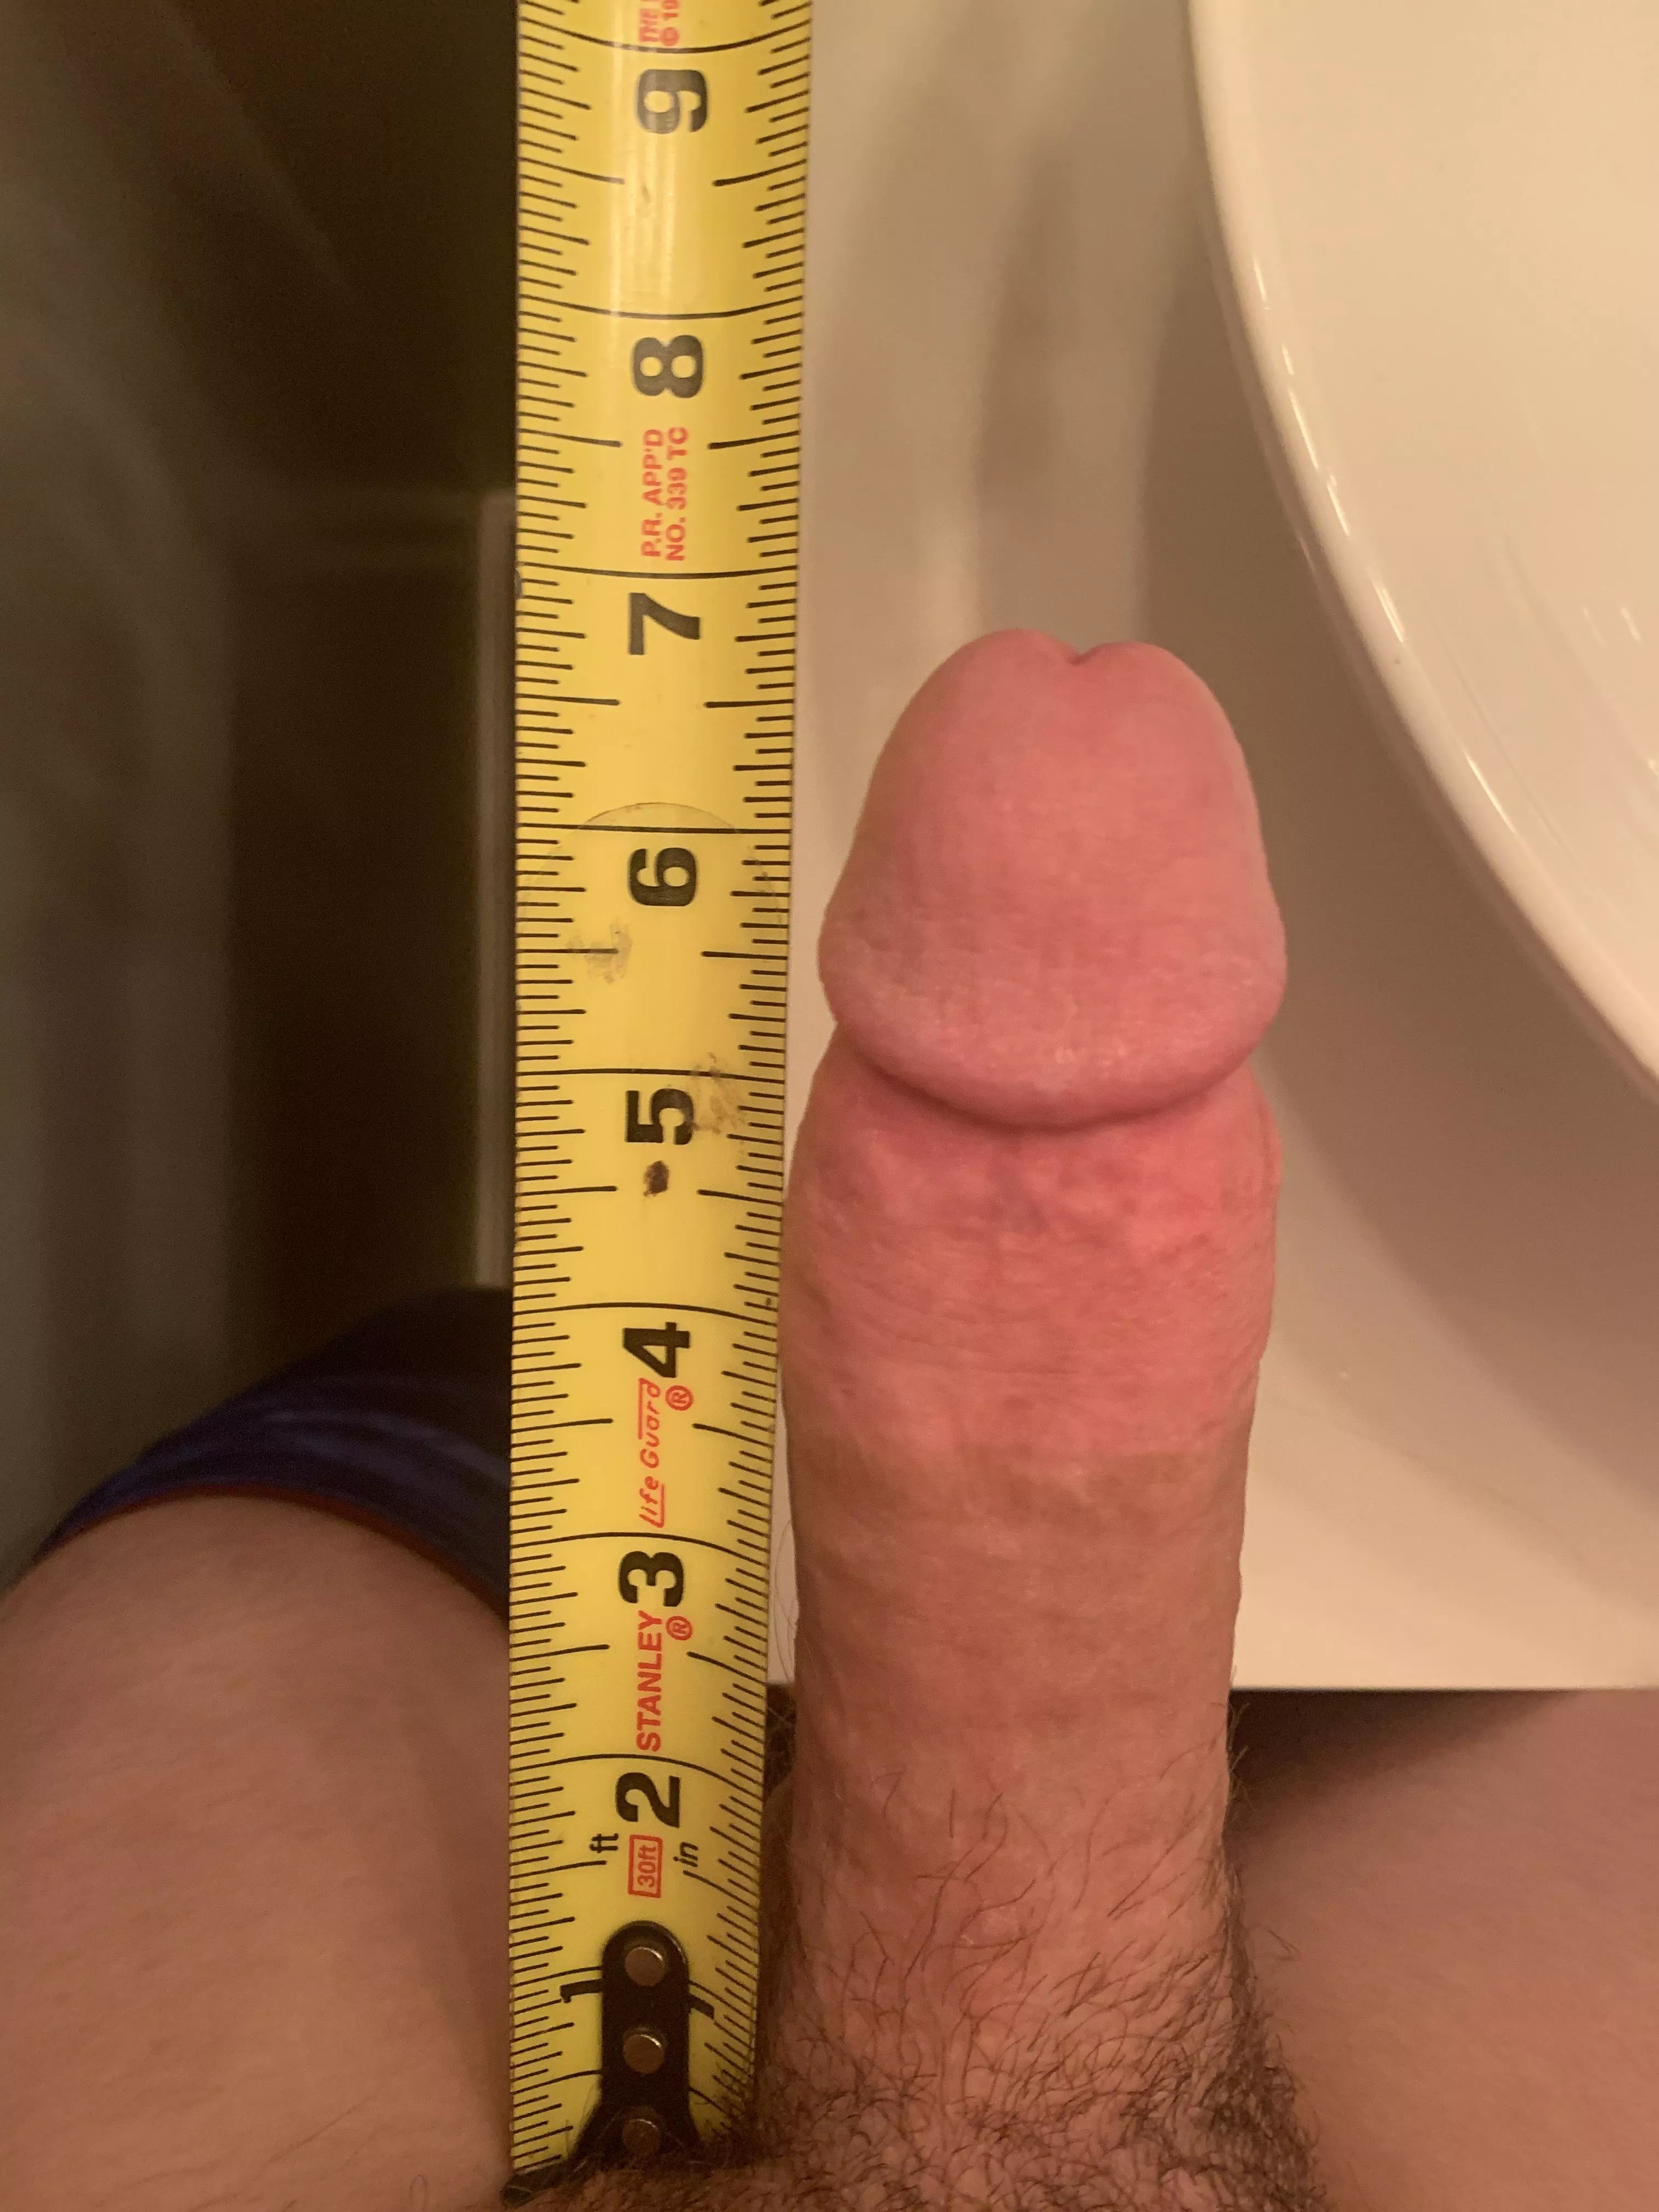 1 inch cock